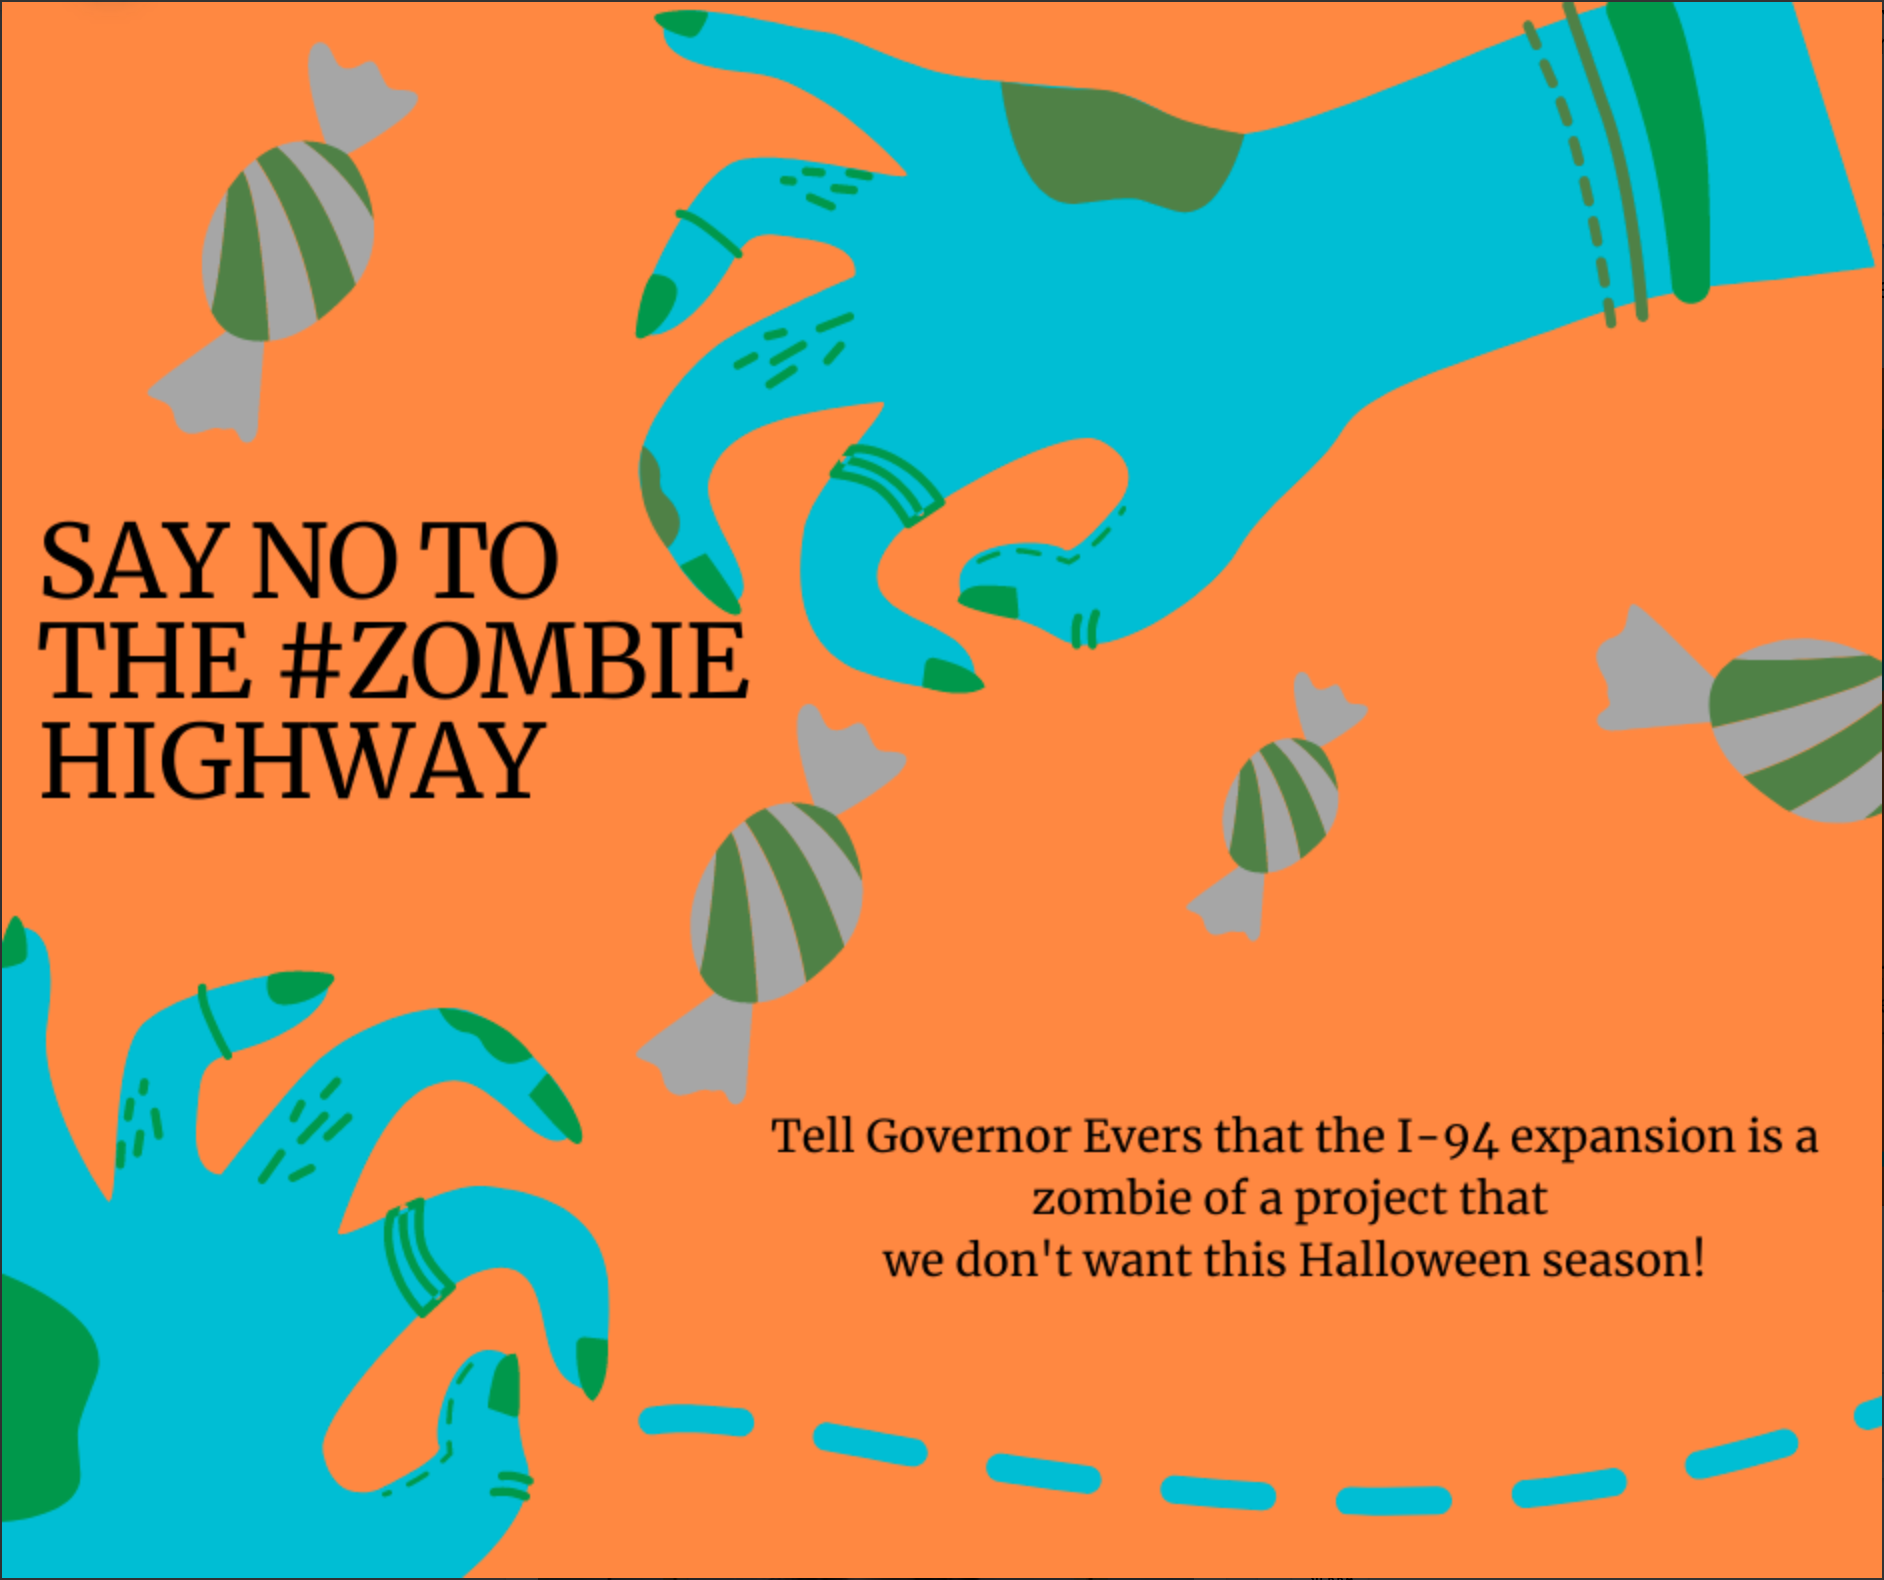 Text reads: Say no to the #zombie highway - tell Governor Evers that the I-94 expansion is a zombie of a project that we don't want this Halloween season! Image in background shows monster hands and candy